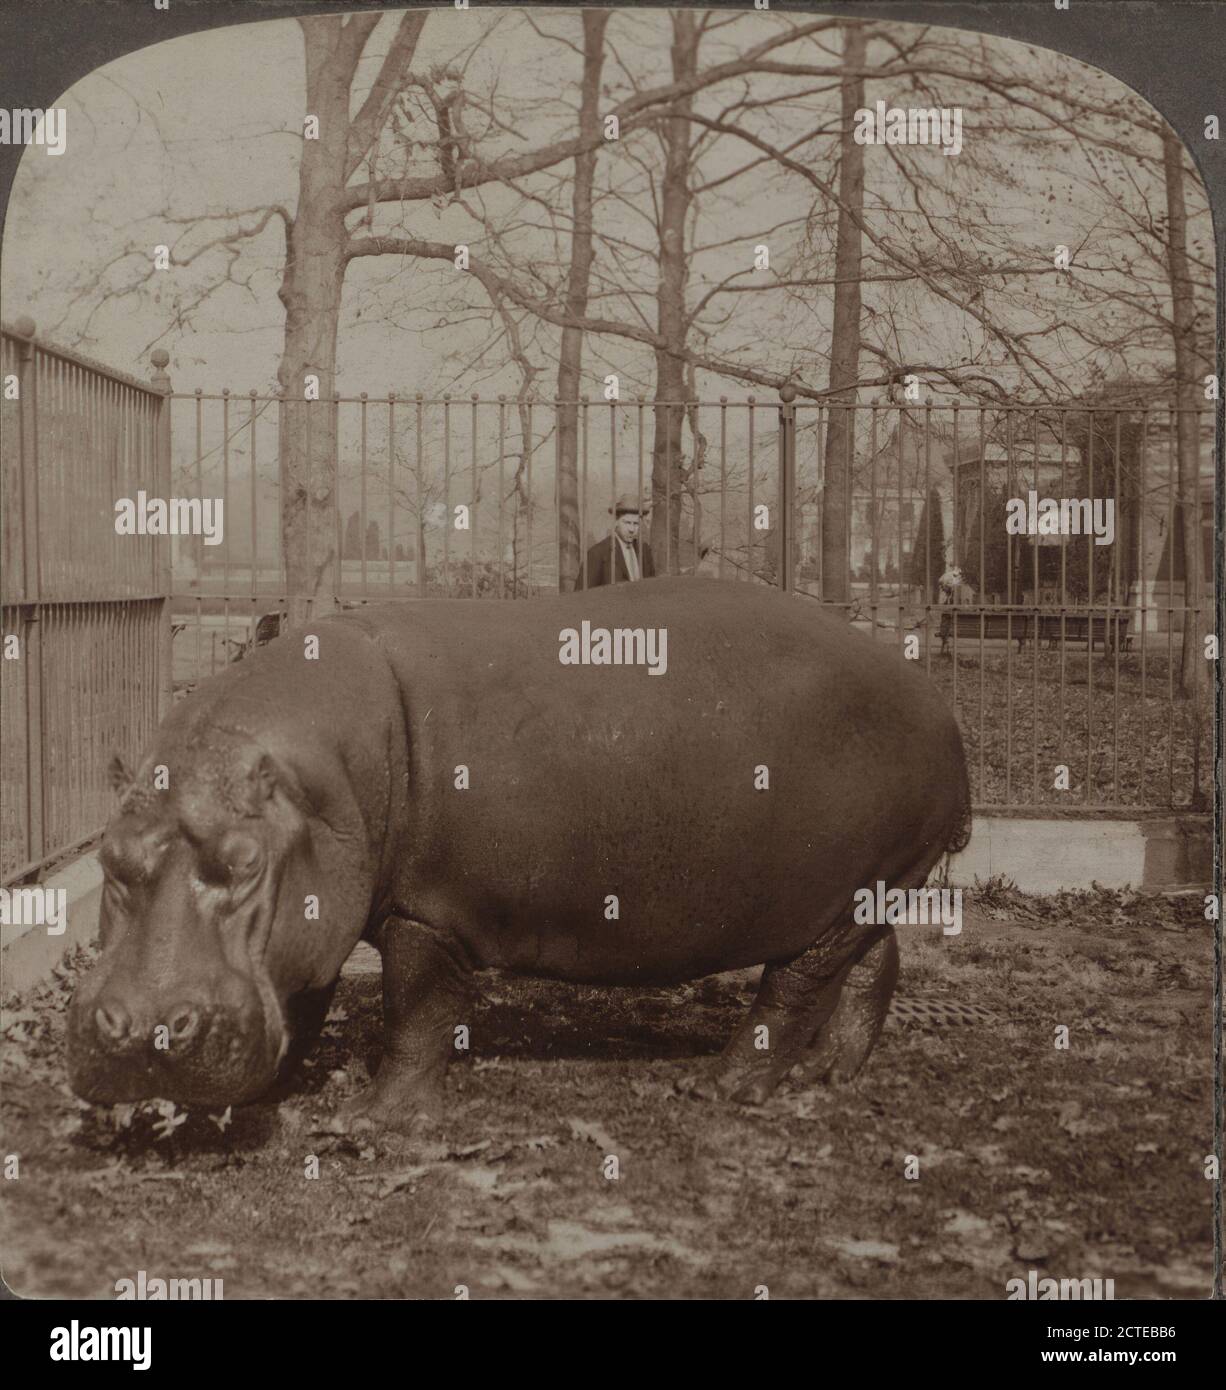 Bulky hippopotamus, over a ton in weight, Zoological Park, N.Y., Underwood & Underwood, New York (State), New York (N.Y.), New York, Central Park (New York, N.Y.), Manhattan (New York, N.Y Stock Photo